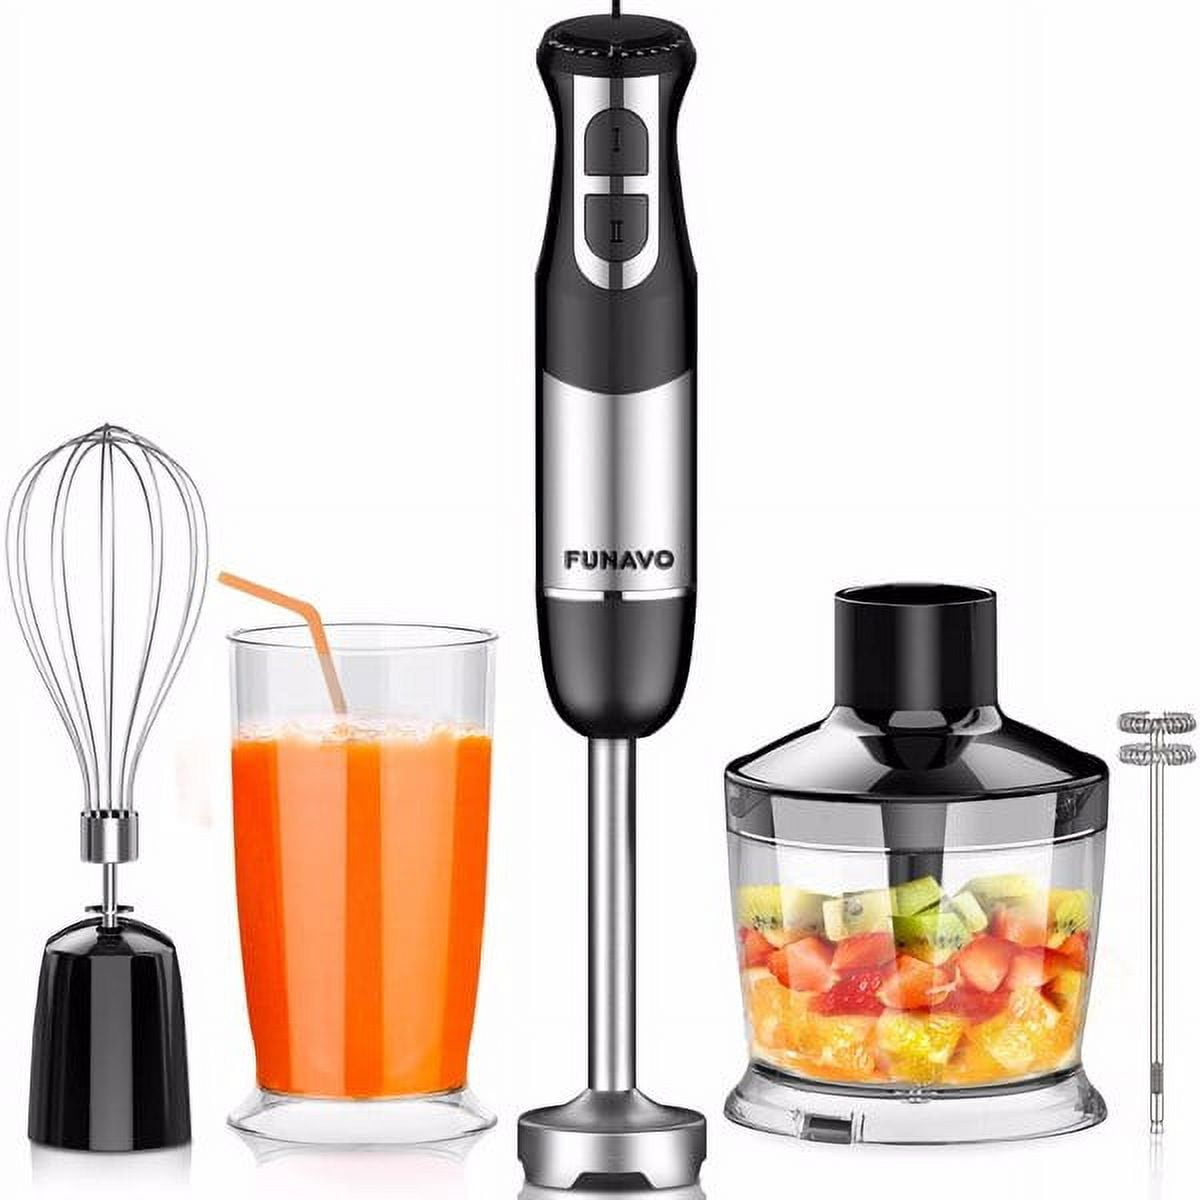 Immersion Hand Blender 5 in 1: 1100W Electric Blender Handheld Stick Mixer  with Trigger Control Grip, Emulsion Blenders for Kitchen Soup, Mayo,  Smoothie and Baby Food with Chopper, Whisk and Frother: Home & Kitchen 